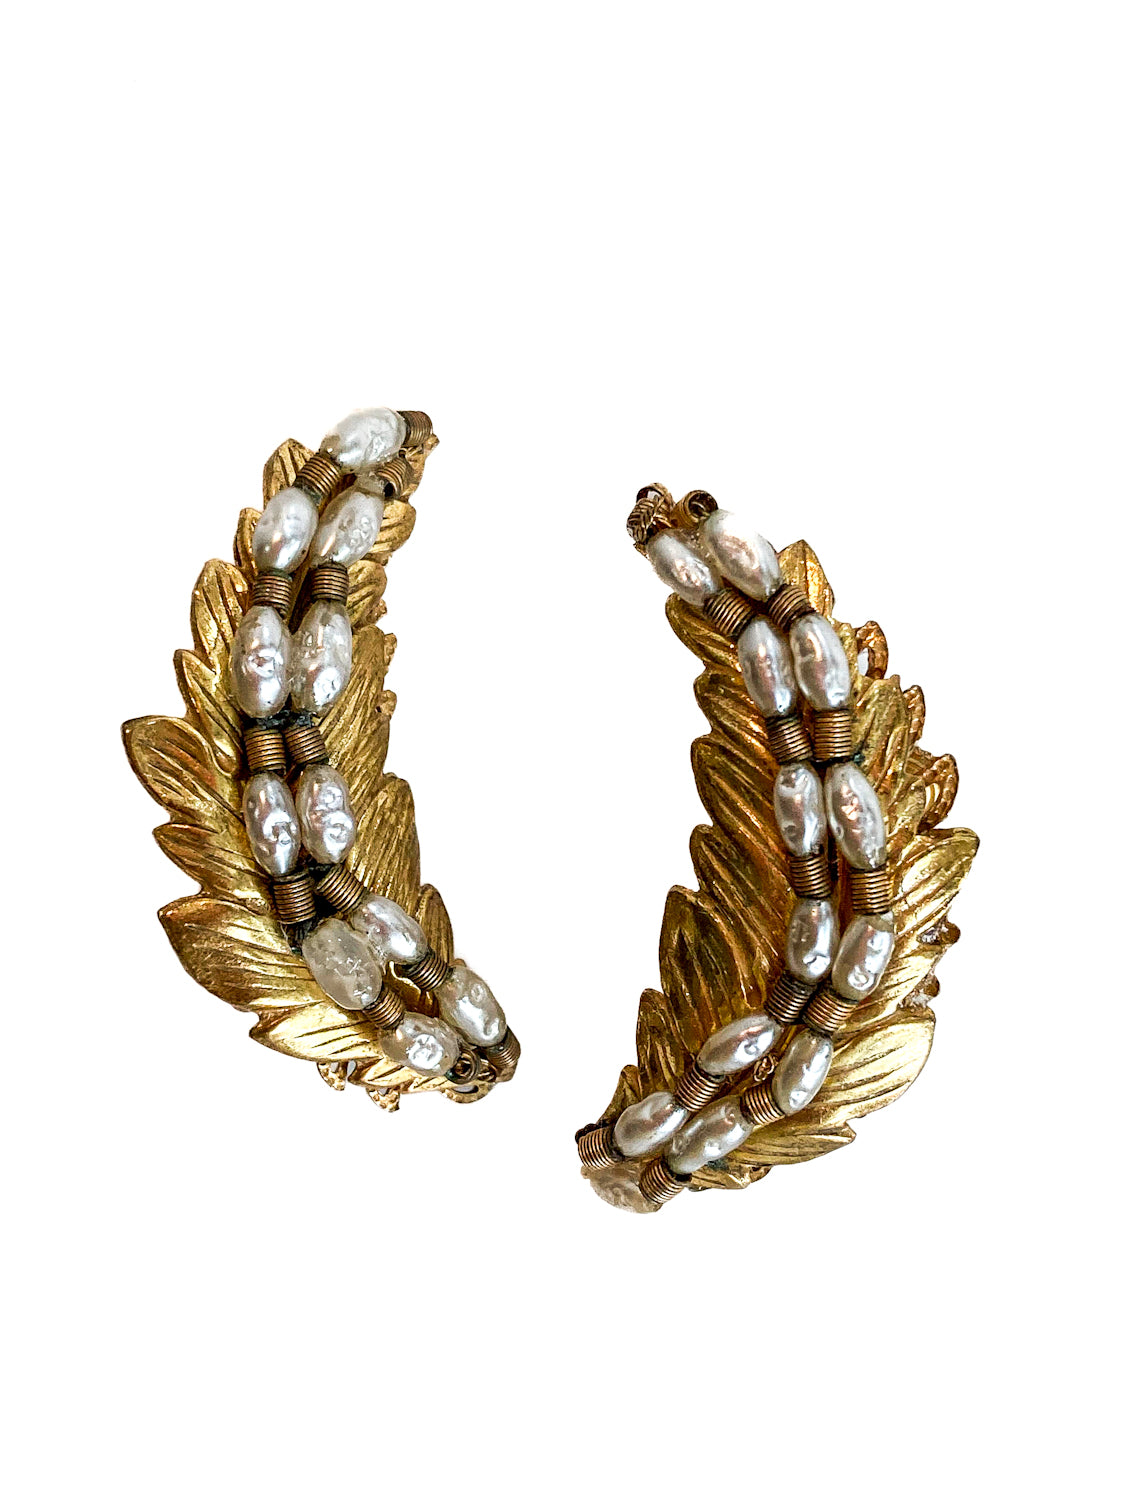 Vintage Miriam Haskell Gold Pearl Feather Ear Cuff Style Screwback Earrings White Background 1